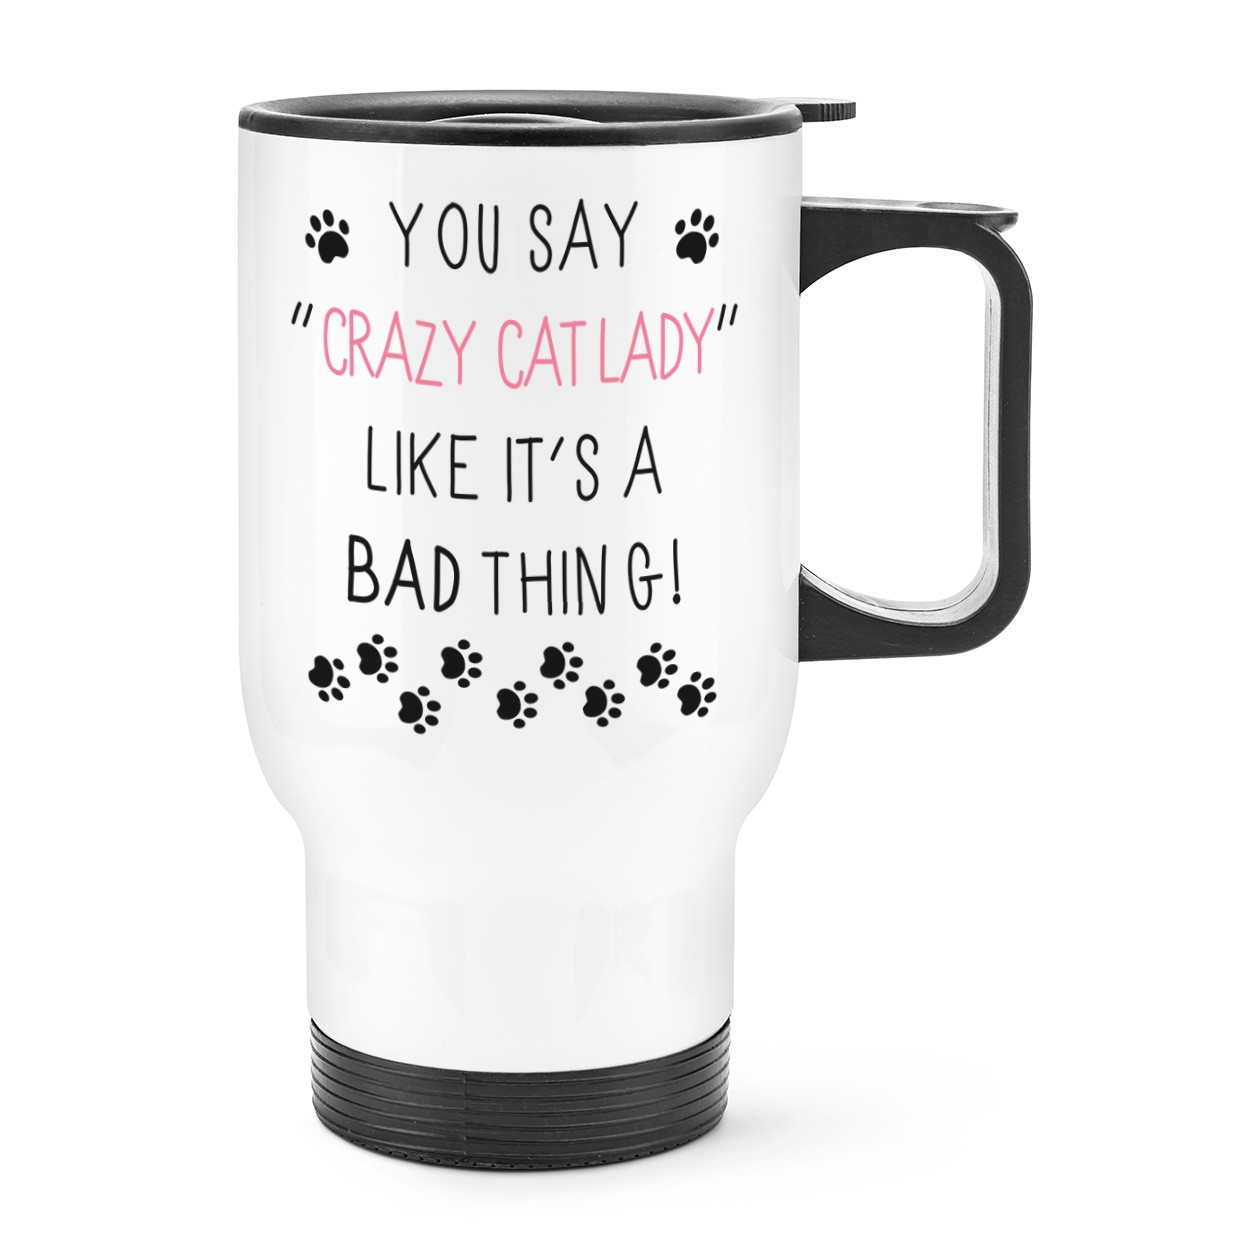 You Say Crazy Cat Lady Like It's A Bad Thing Travel Mug Cup With Handle